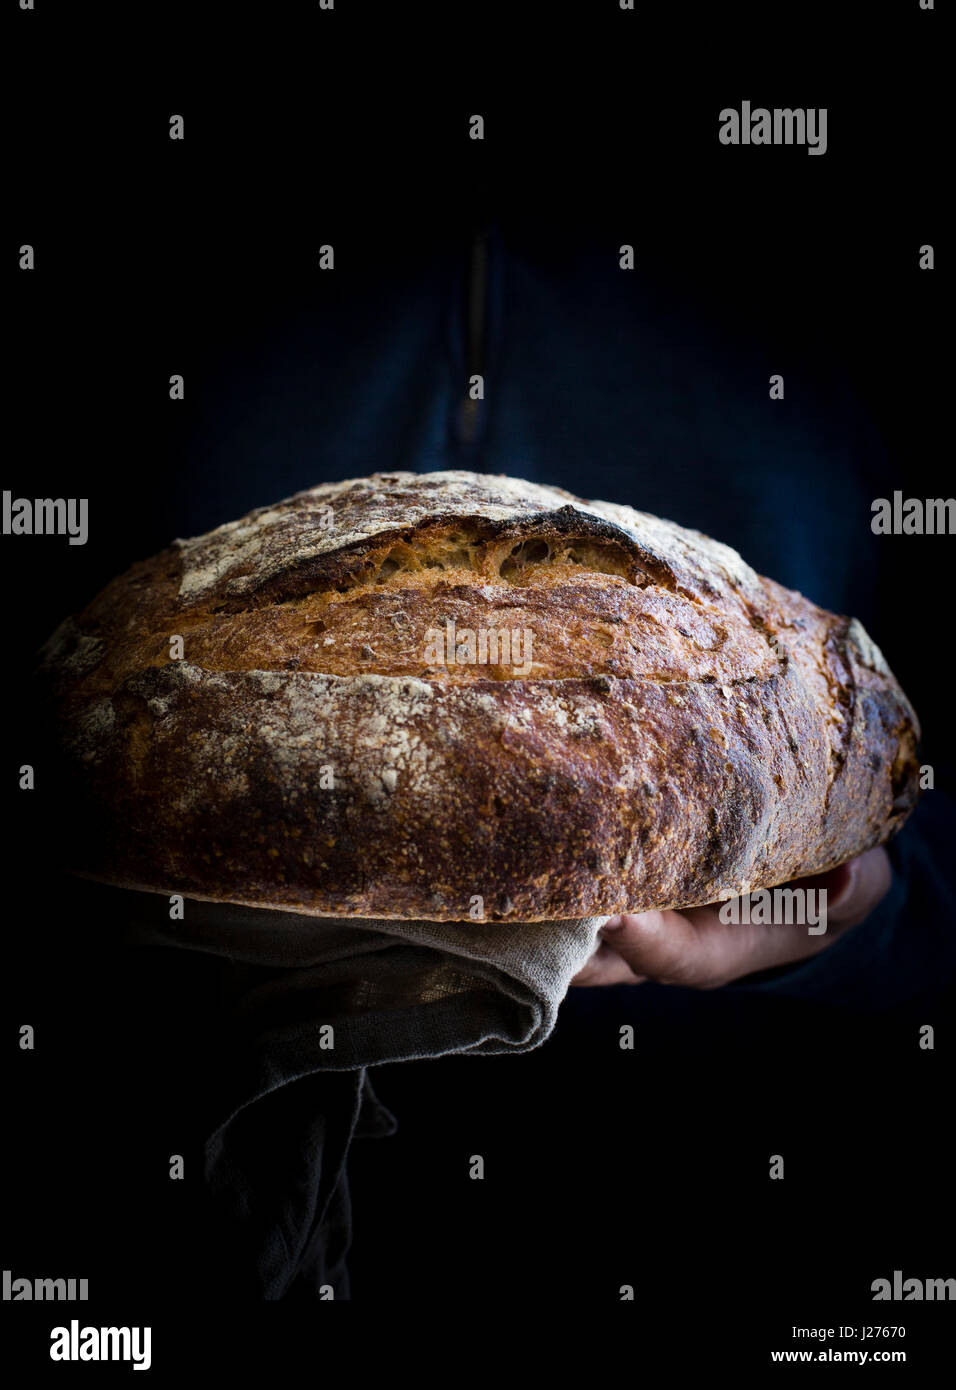 Man holding freshly baked sourdough bread front view Stock Photo